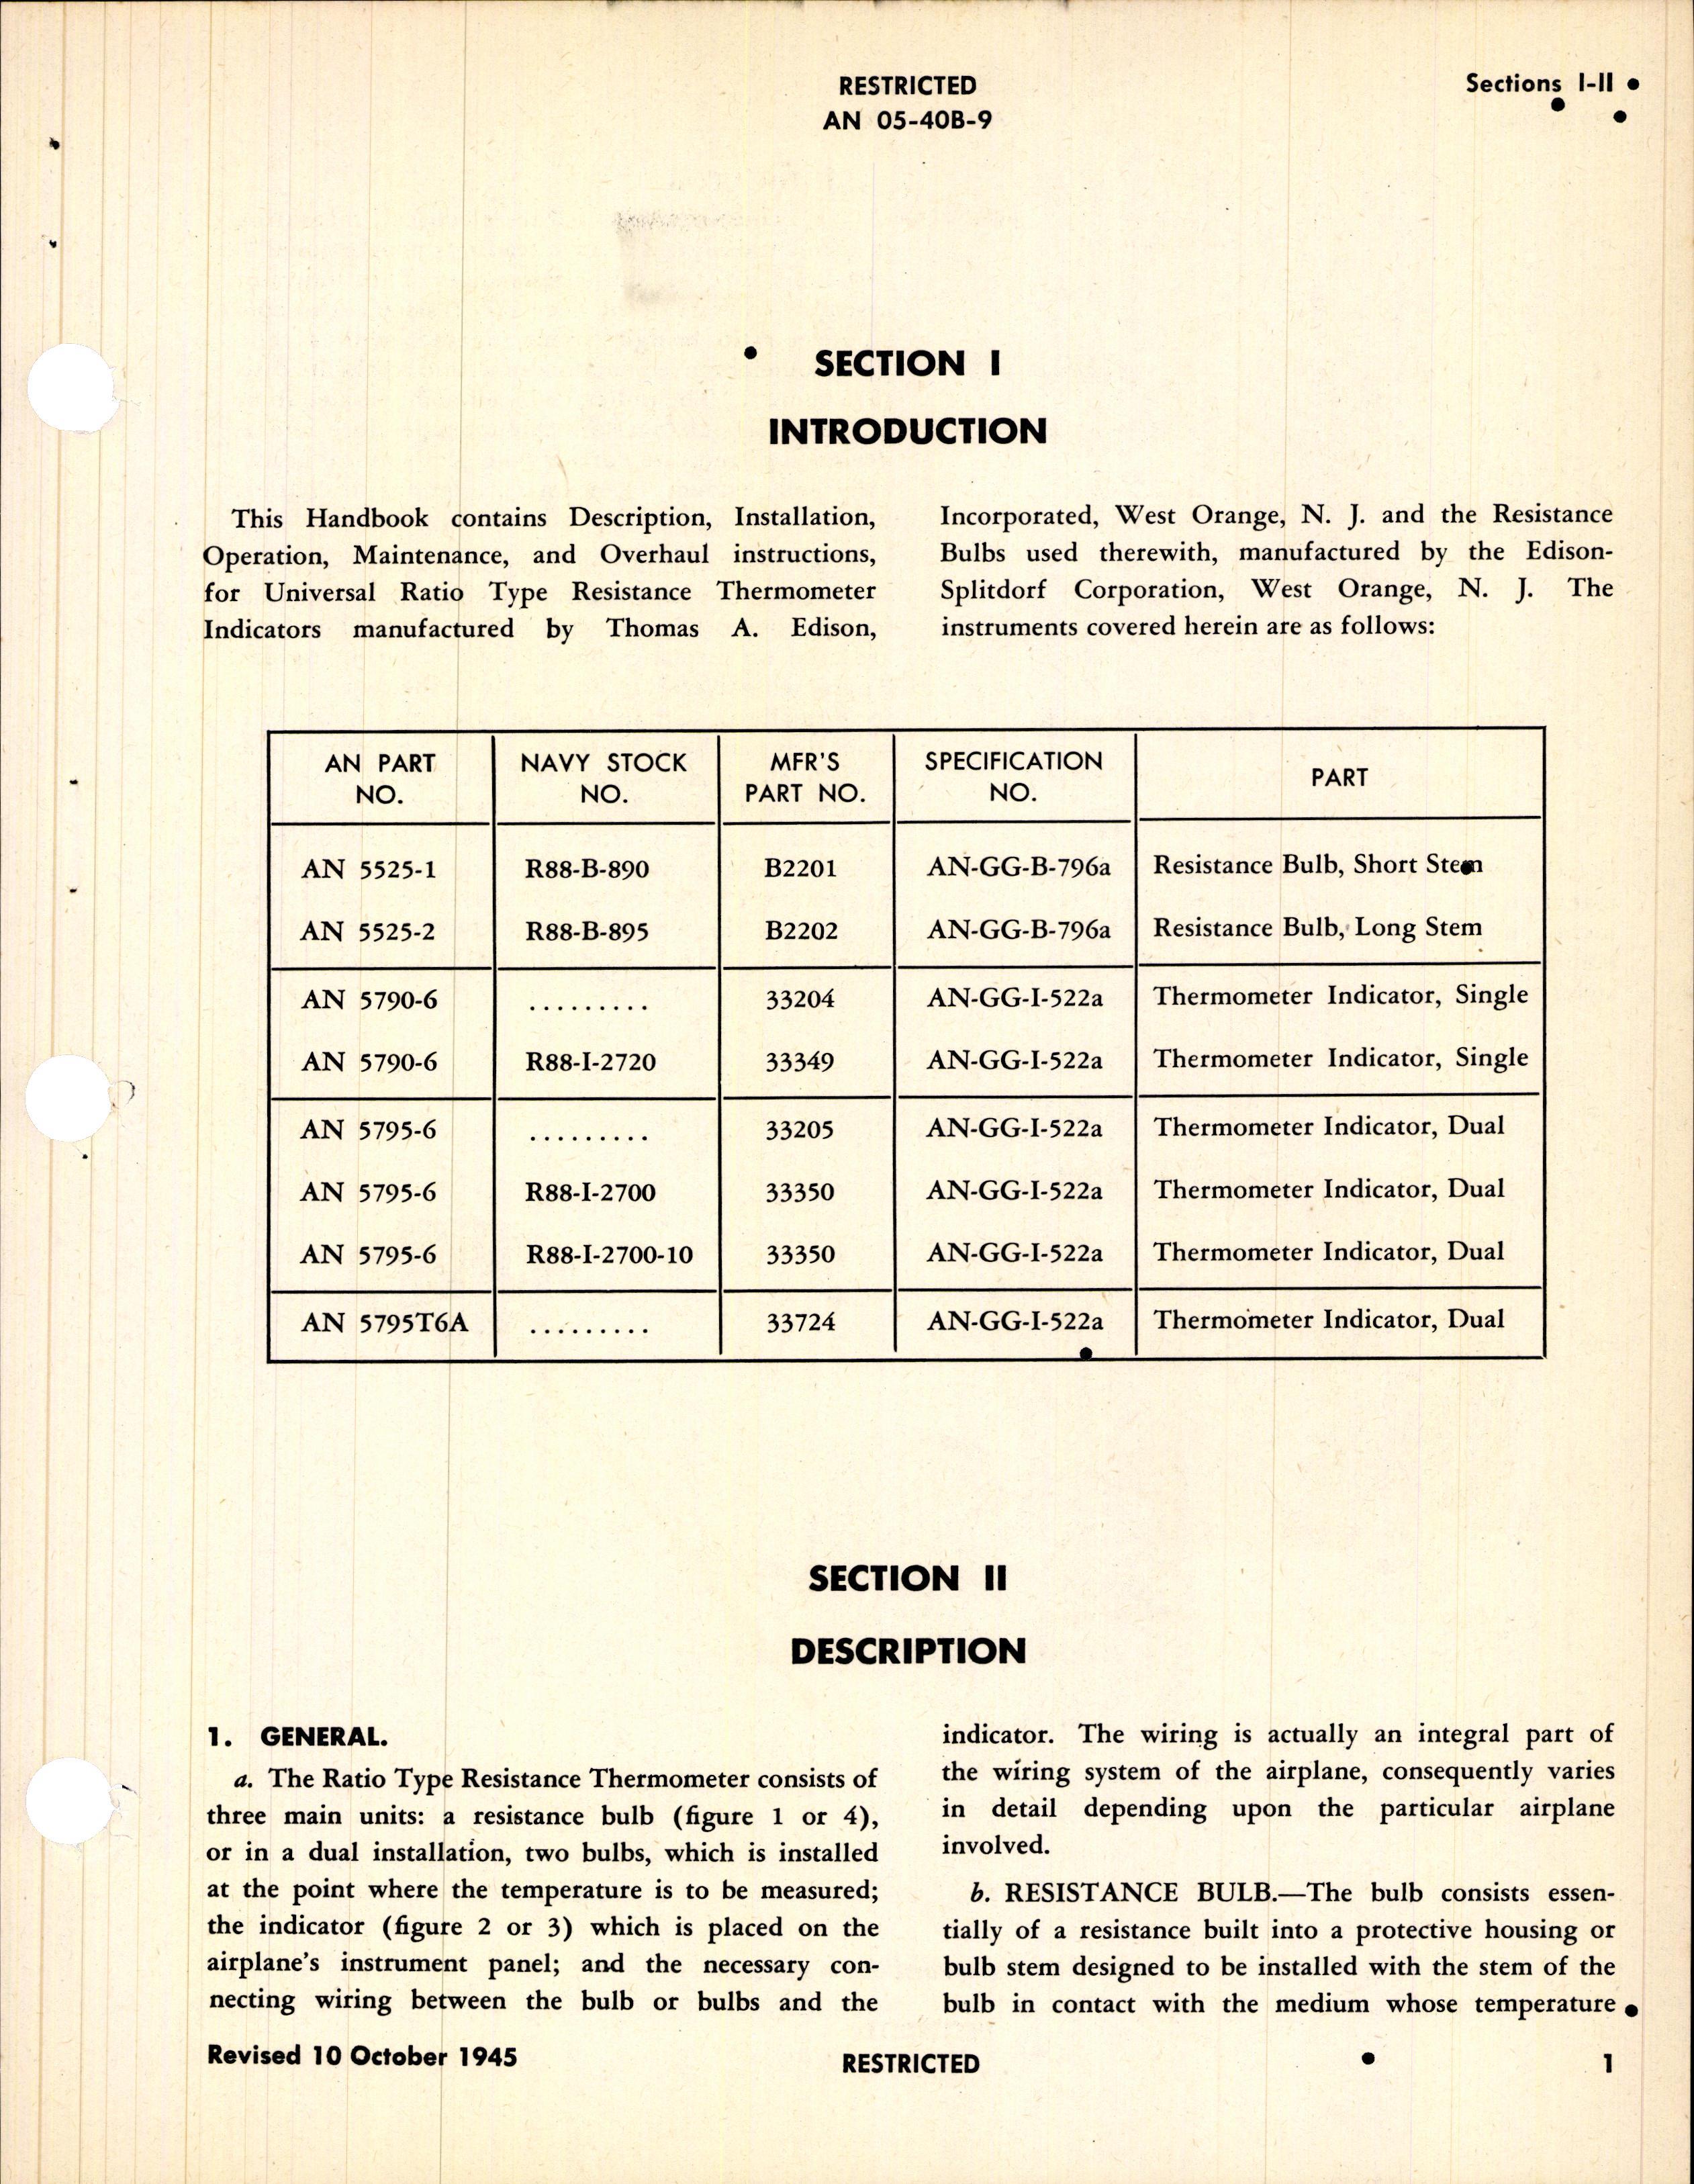 Sample page 7 from AirCorps Library document: Operation, Service, & Overhaul Instructions with Parts Catalog for Thermometer Indicators